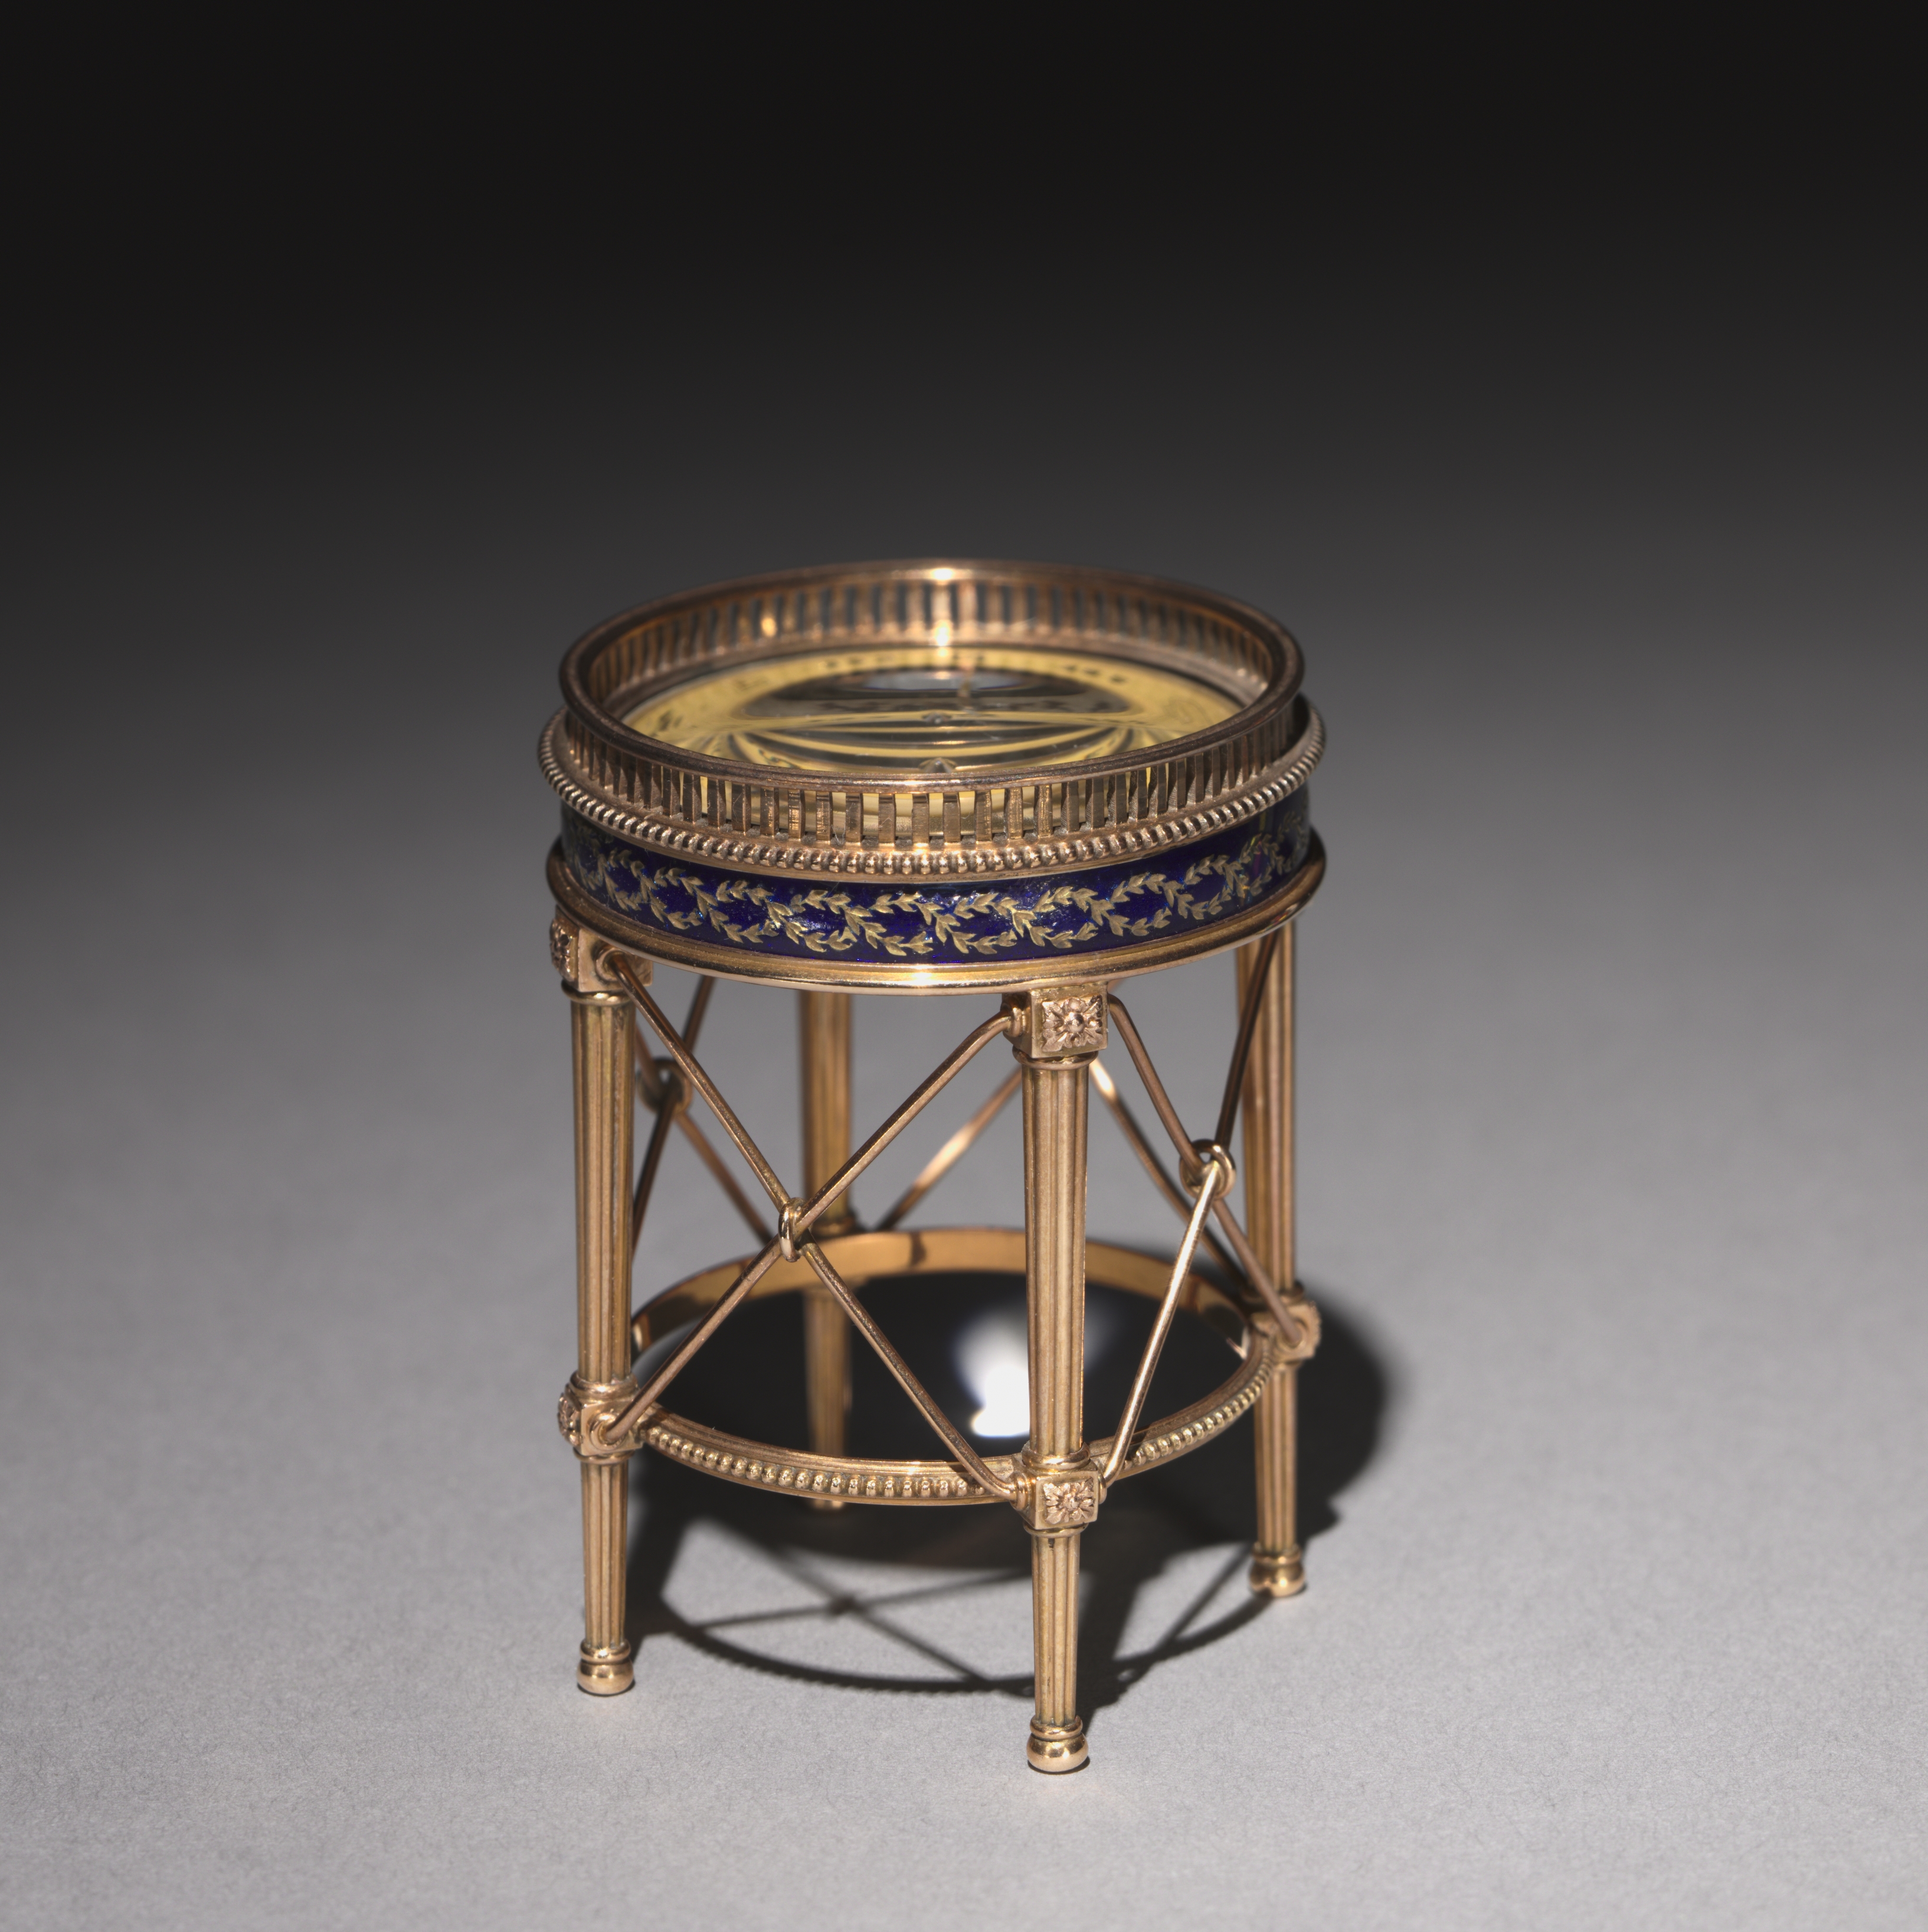 Miniature Table with Compass